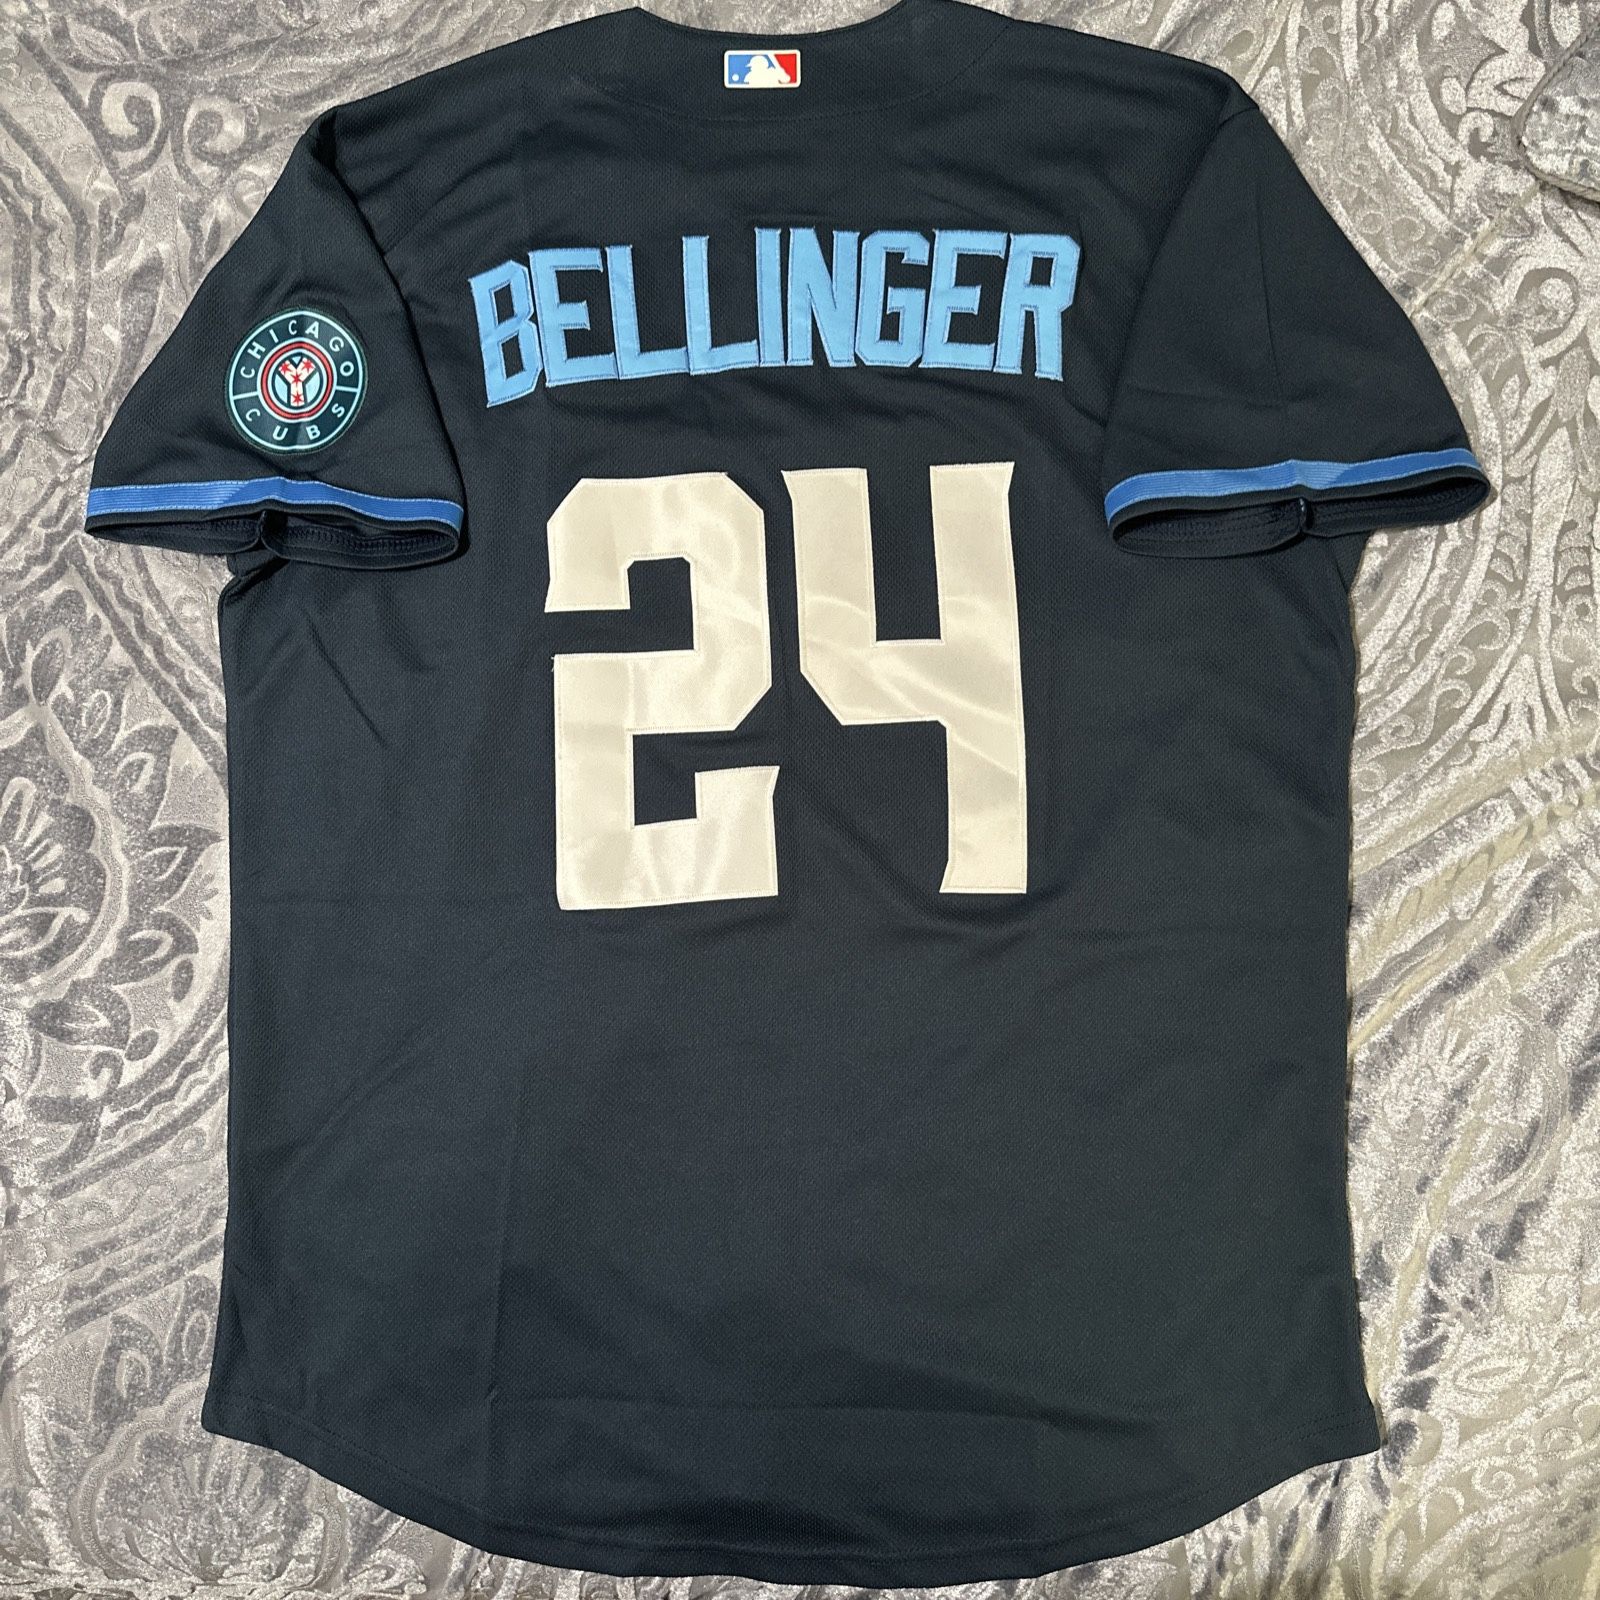 Cody Bellinger Jersey Chicago Cubs Navy Blue City Connect Wrigleyville Large